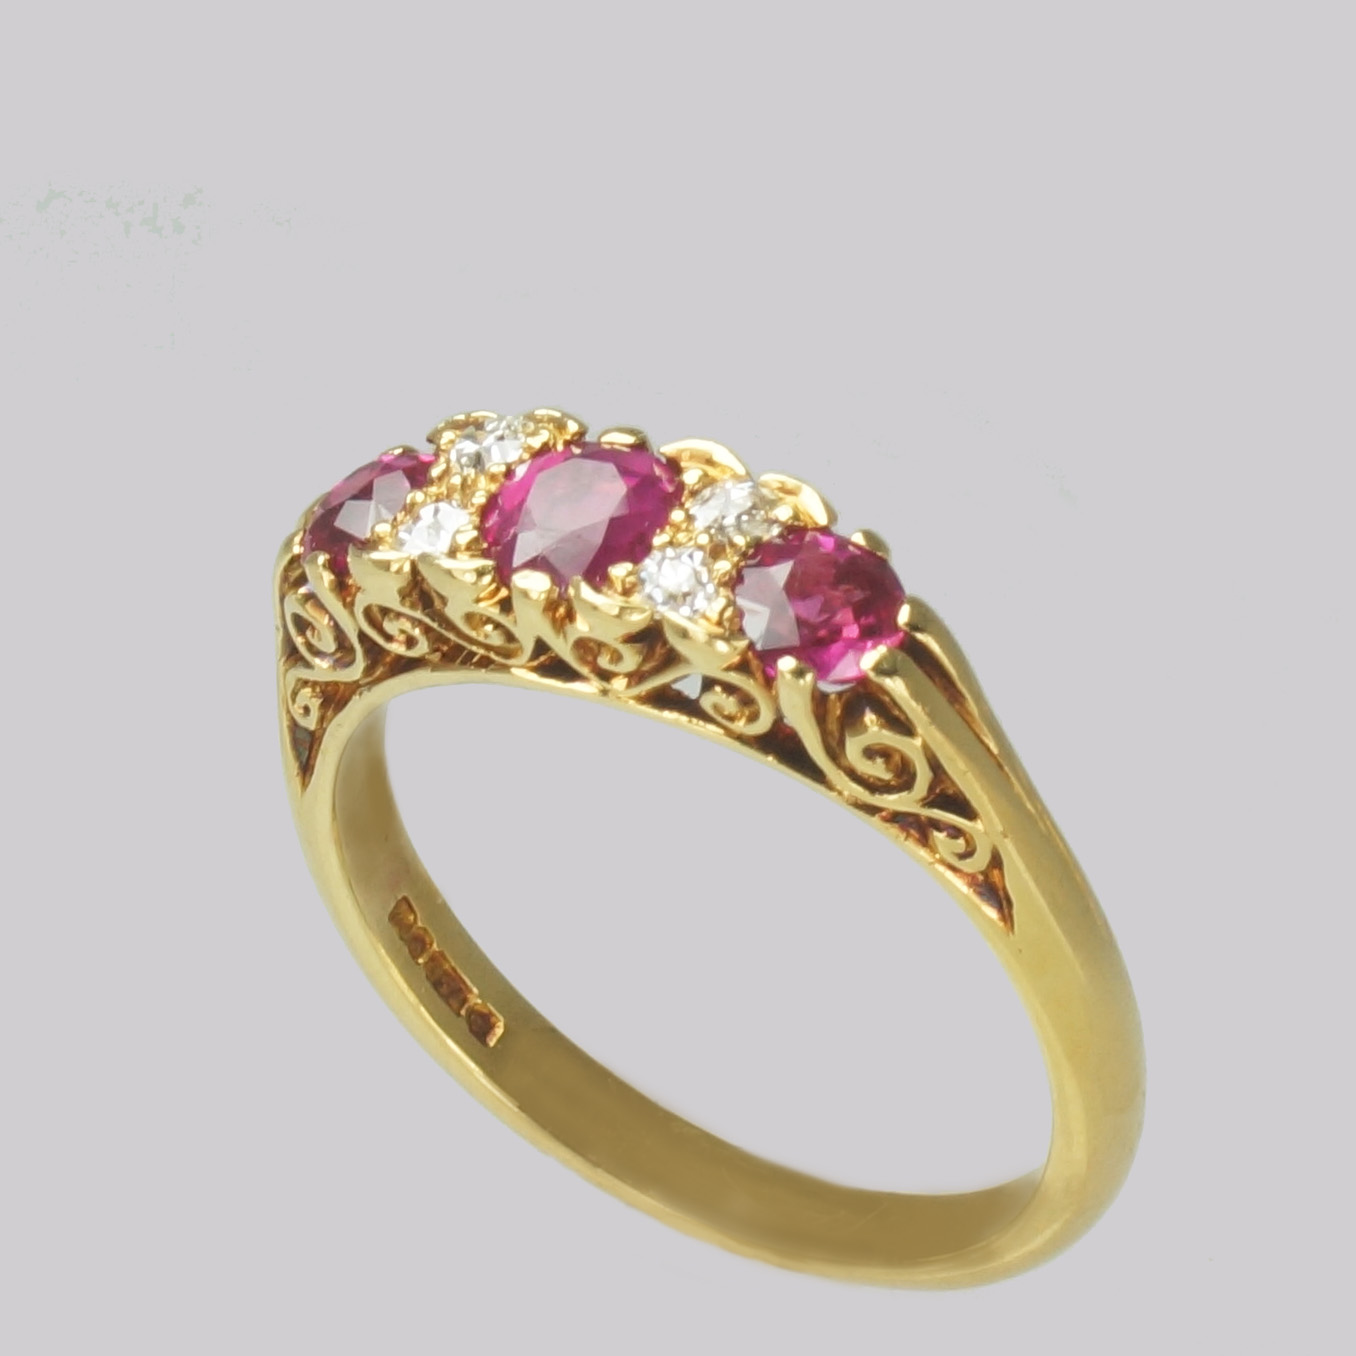 Vintage 18ct Gold Ruby & Diamond Ring - The Chelsea Bijouterie